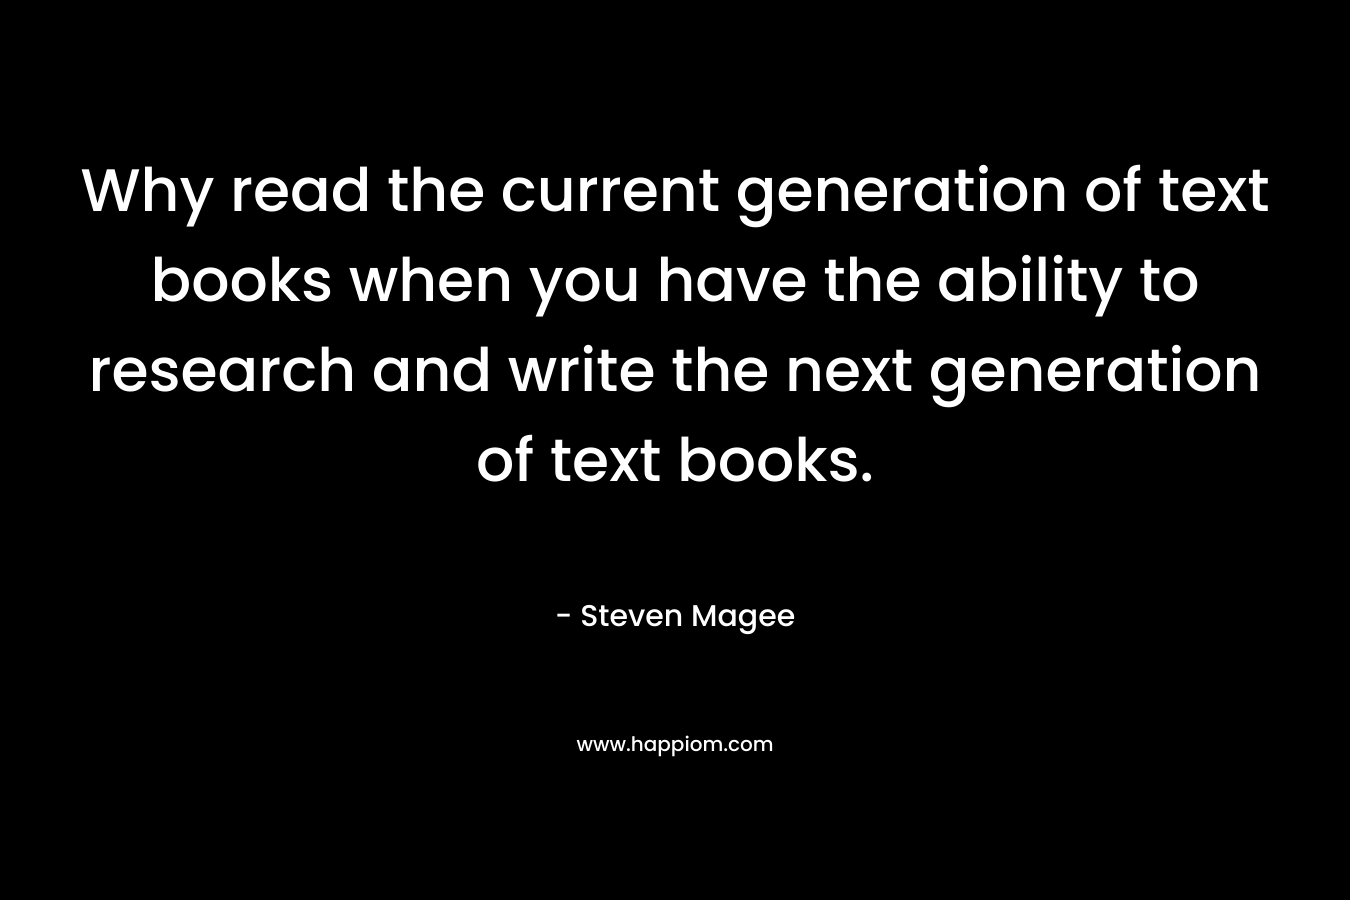 Why read the current generation of text books when you have the ability to research and write the next generation of text books.